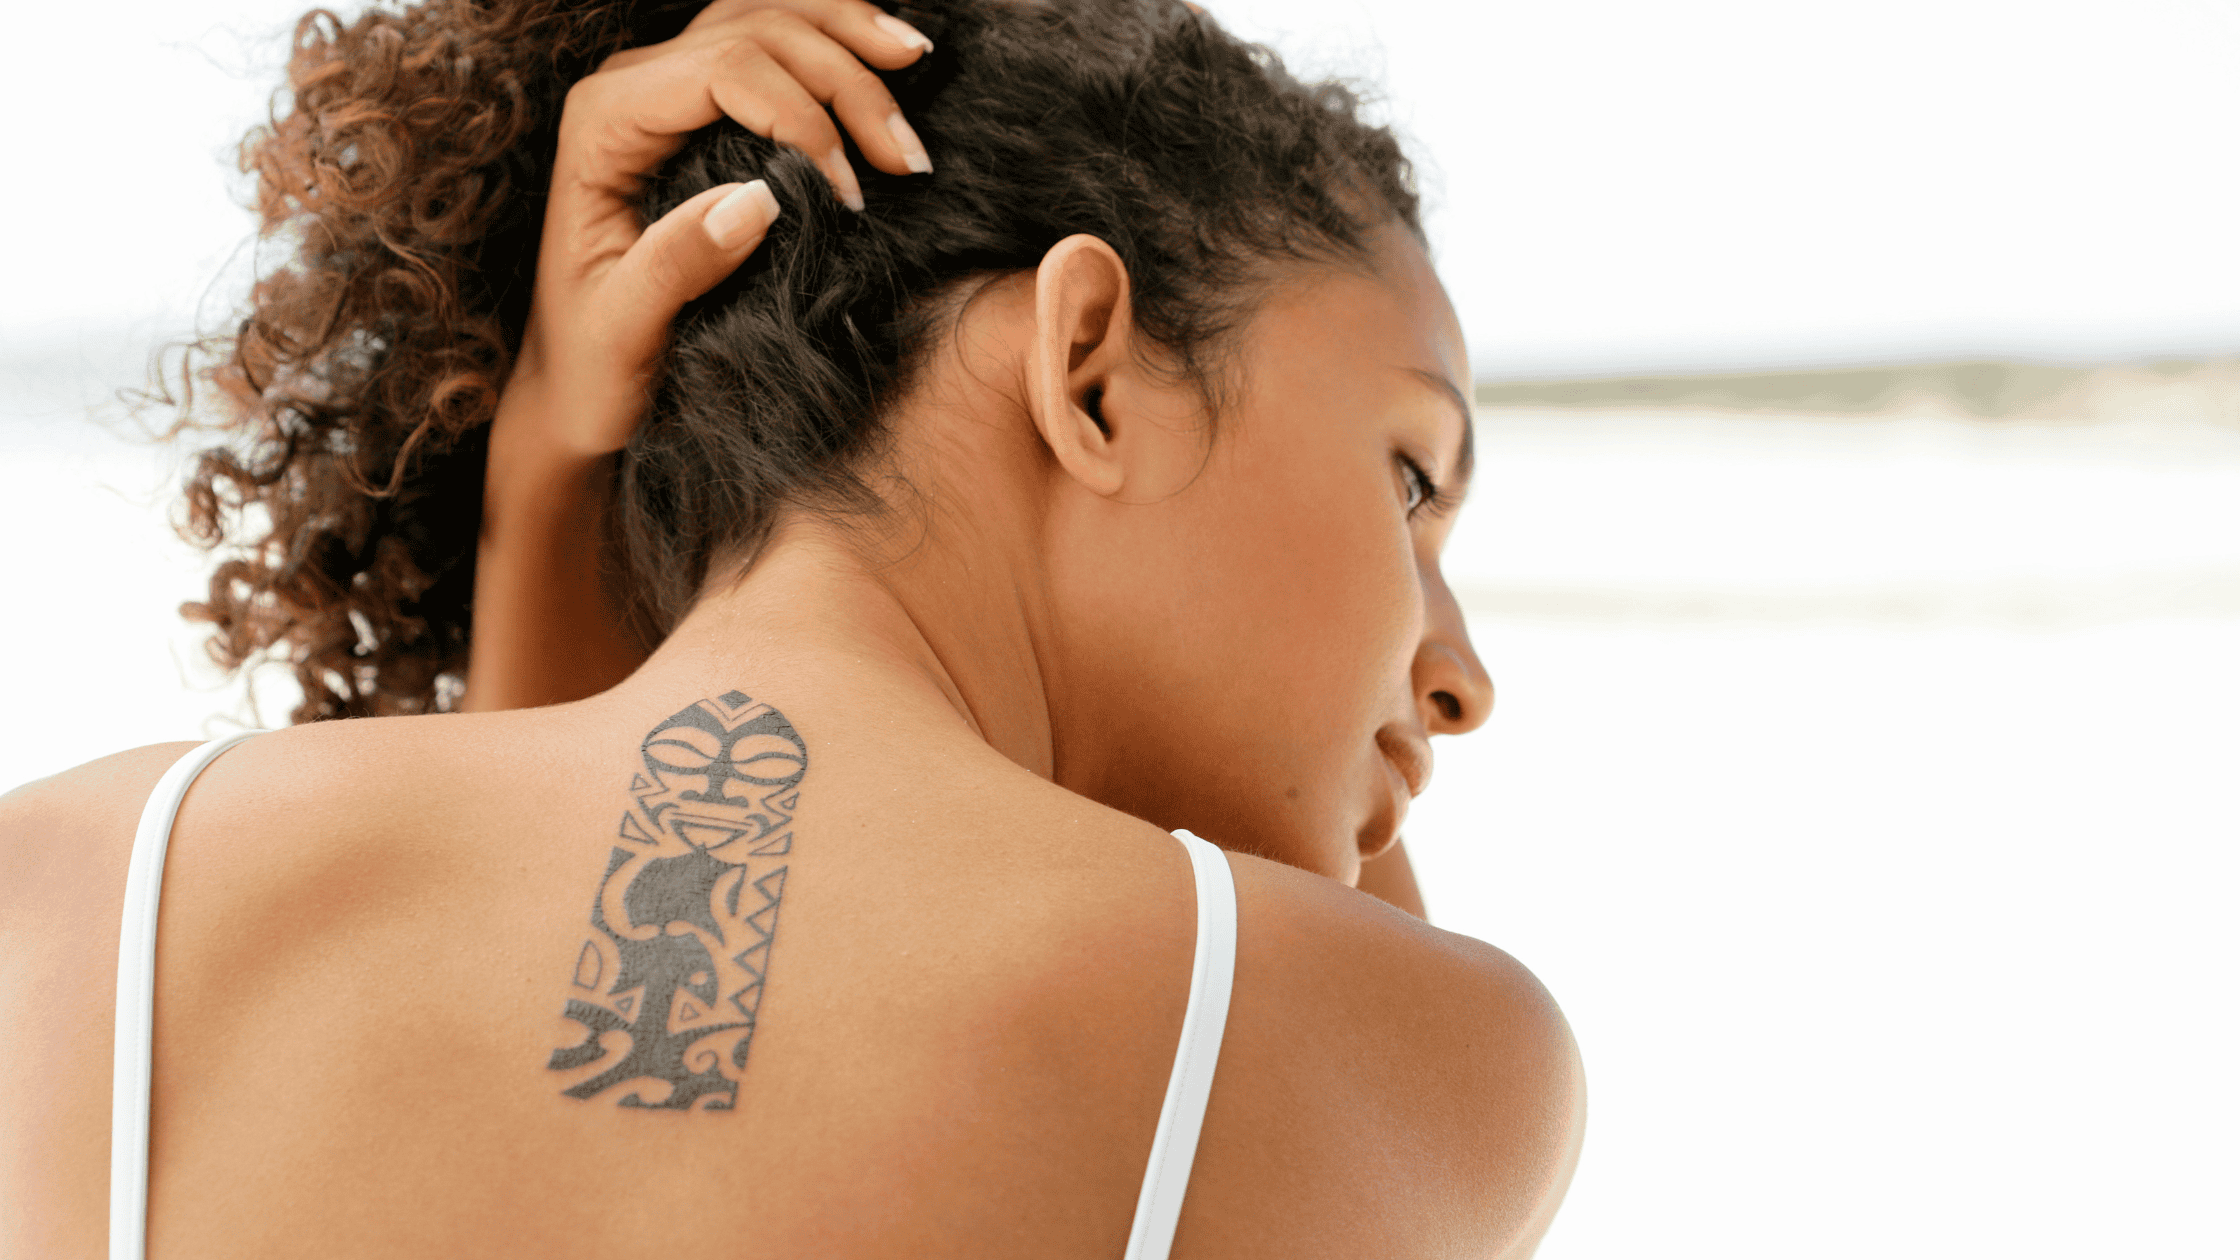 Symbolic Tattoos: Choose a Symbol That Represents the Child’s Personality or Interests